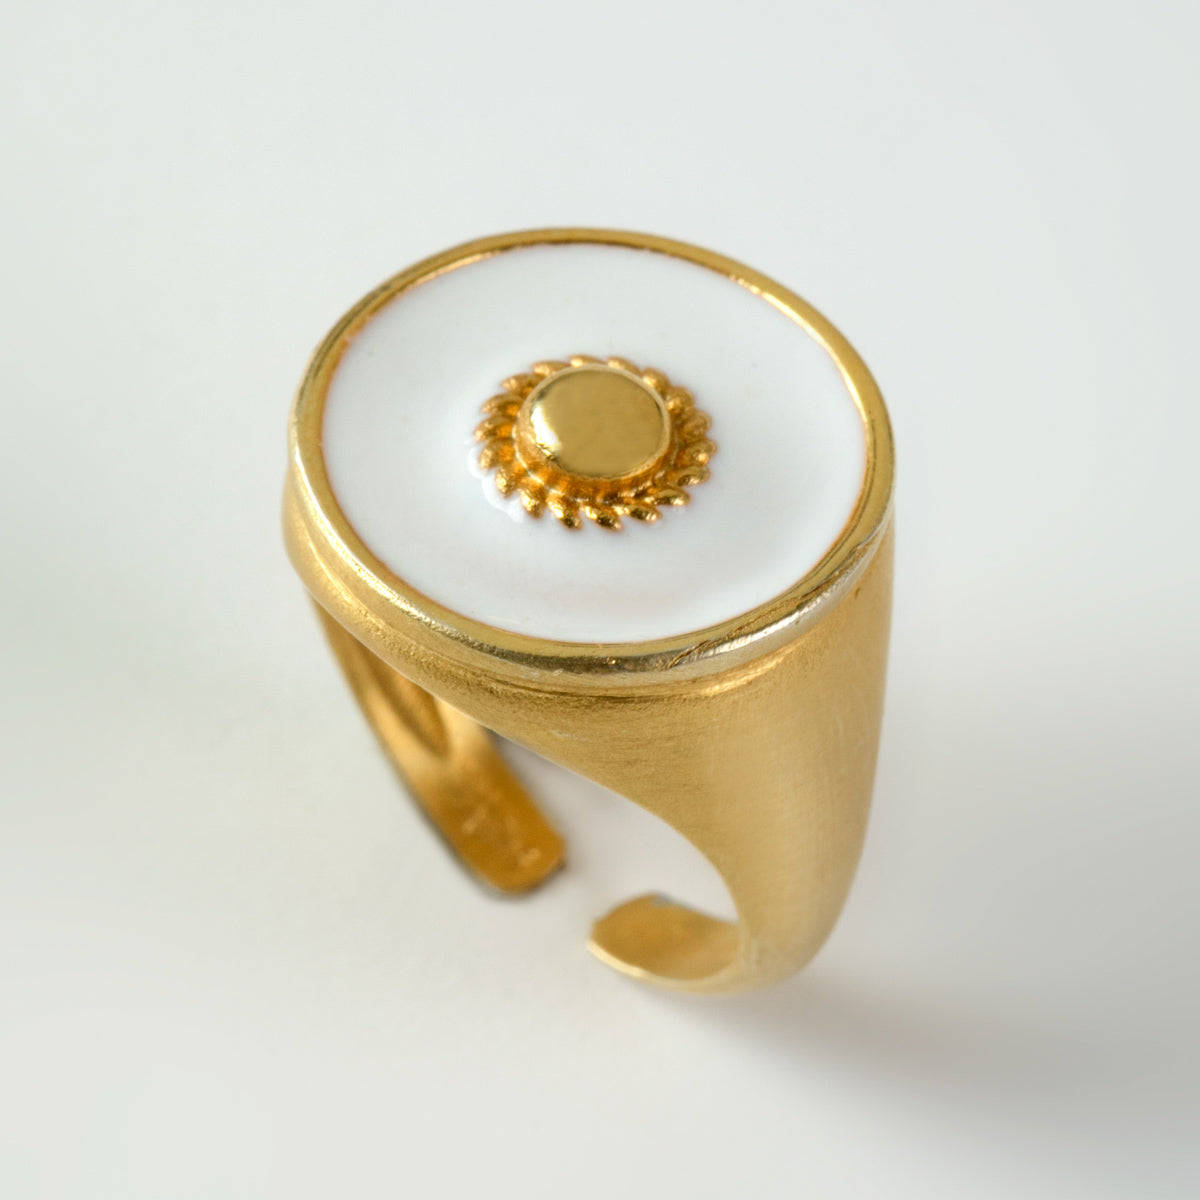 Ino ring silver 925° gold plated 22k by Pearl Martini